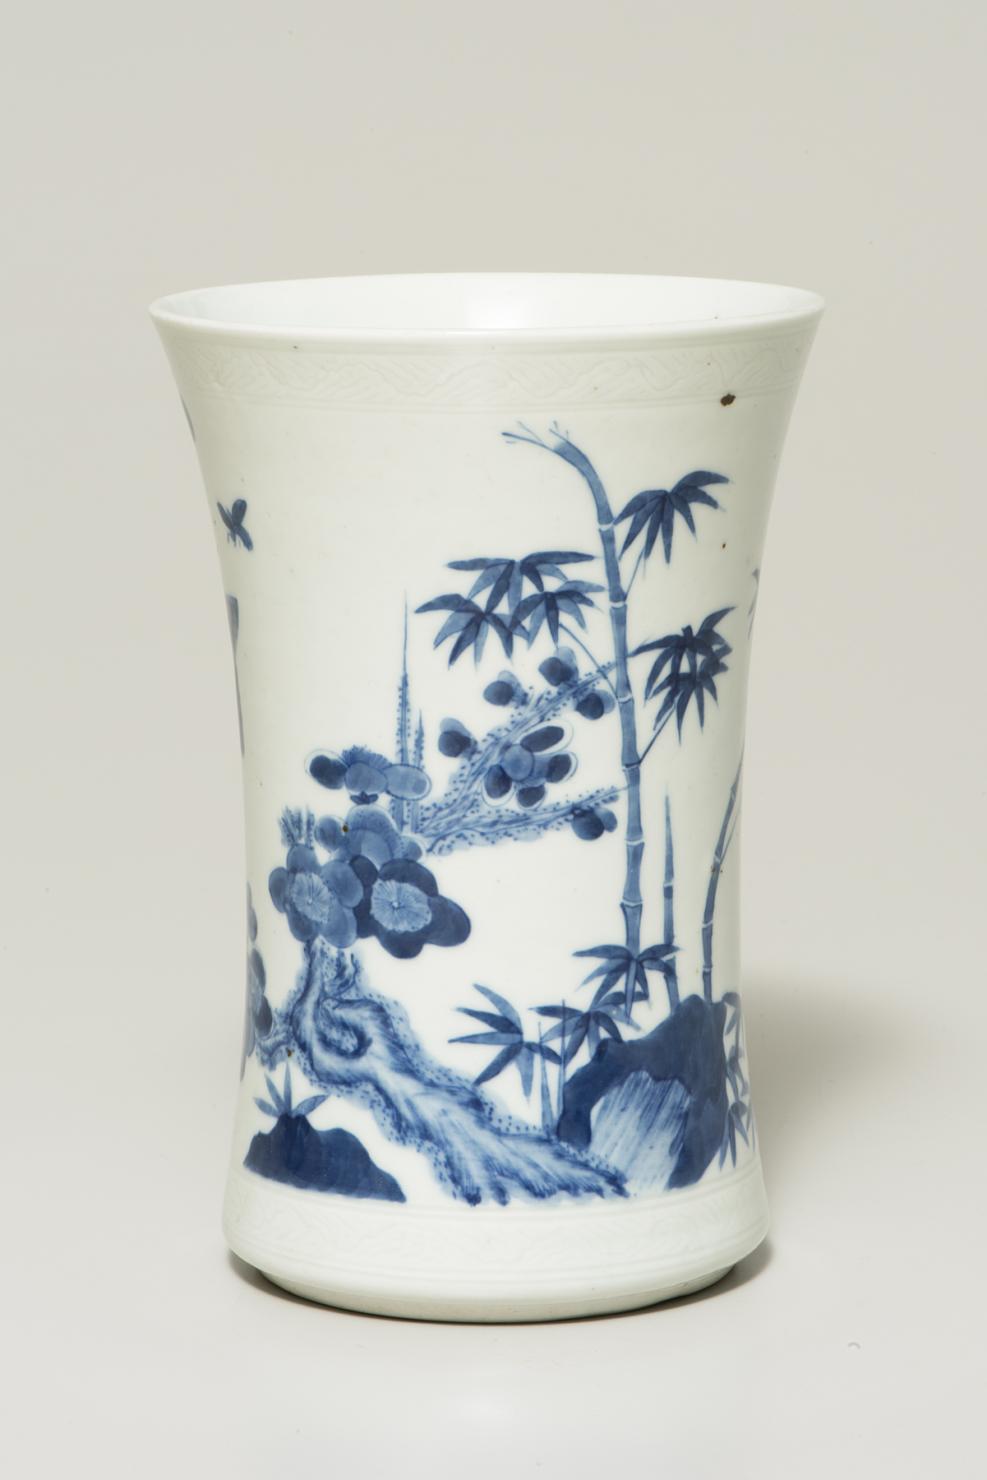 White vase decorated with plum, bamboo, and pine all in shades of blue